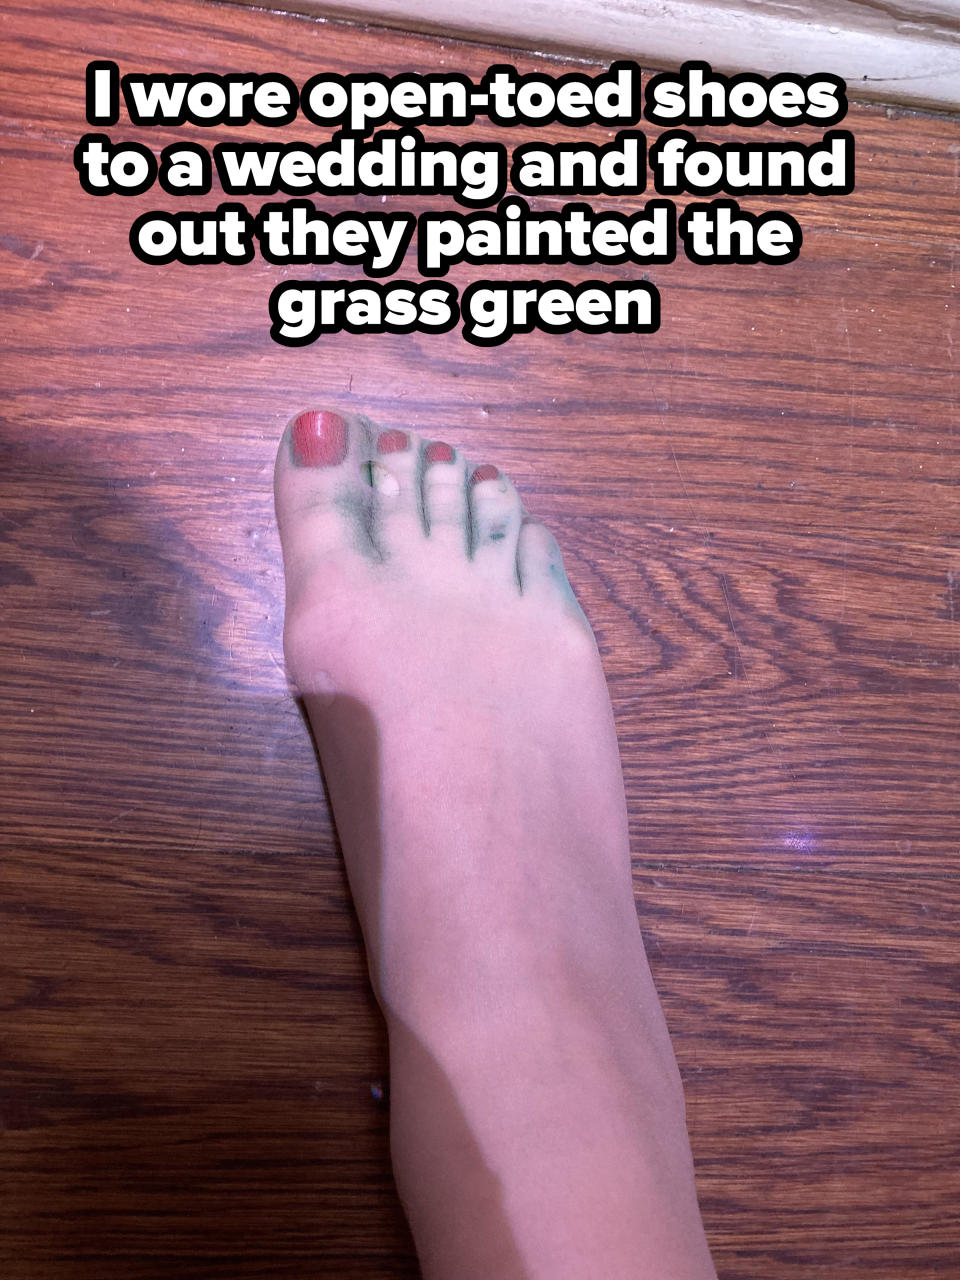 a person with green paint on their foot and the words "I wore open-toed shoes to a wedding and found out they painted the grass green"